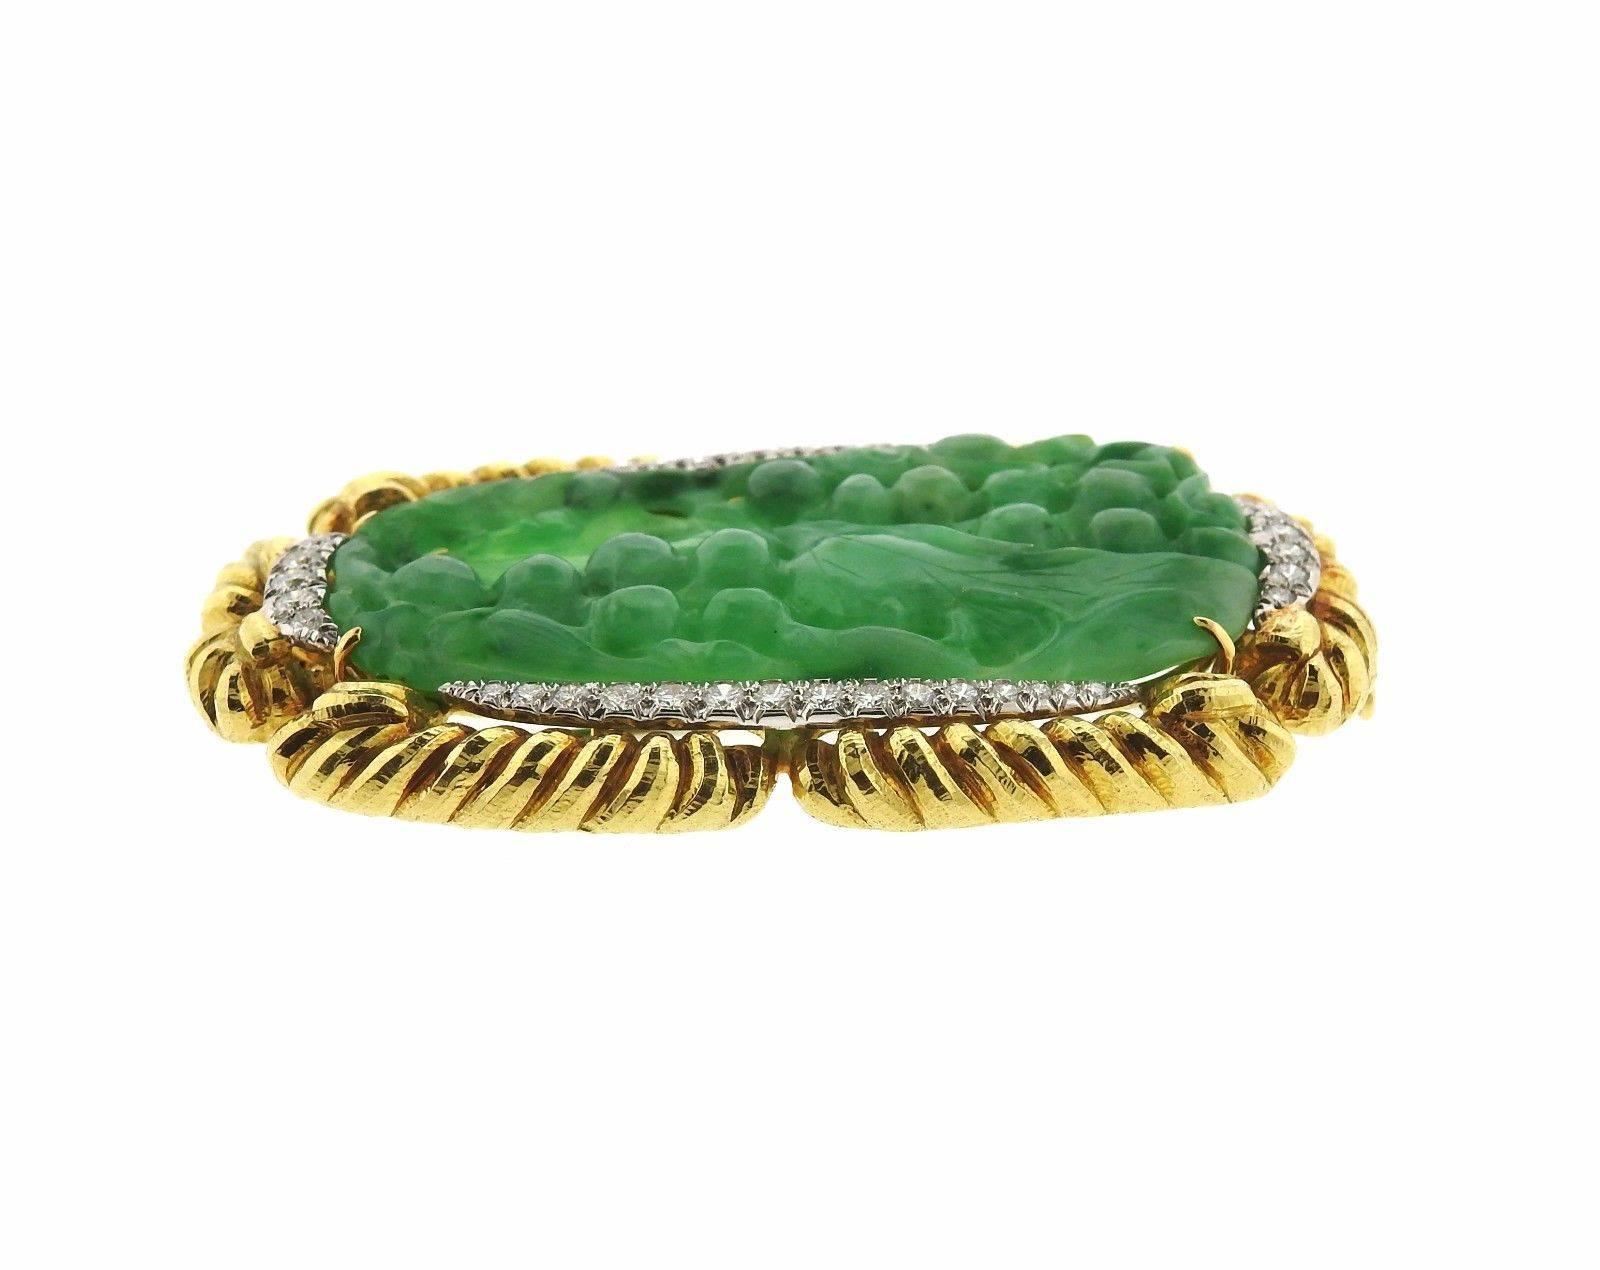 An 18k gold and platinum brooch set with carved jade and approximately 1.70ctw of G/VS diamonds.  The brooch measures 67mm x 42mm and 42.7 grams.  Marked: David Webb, 18k, Plat